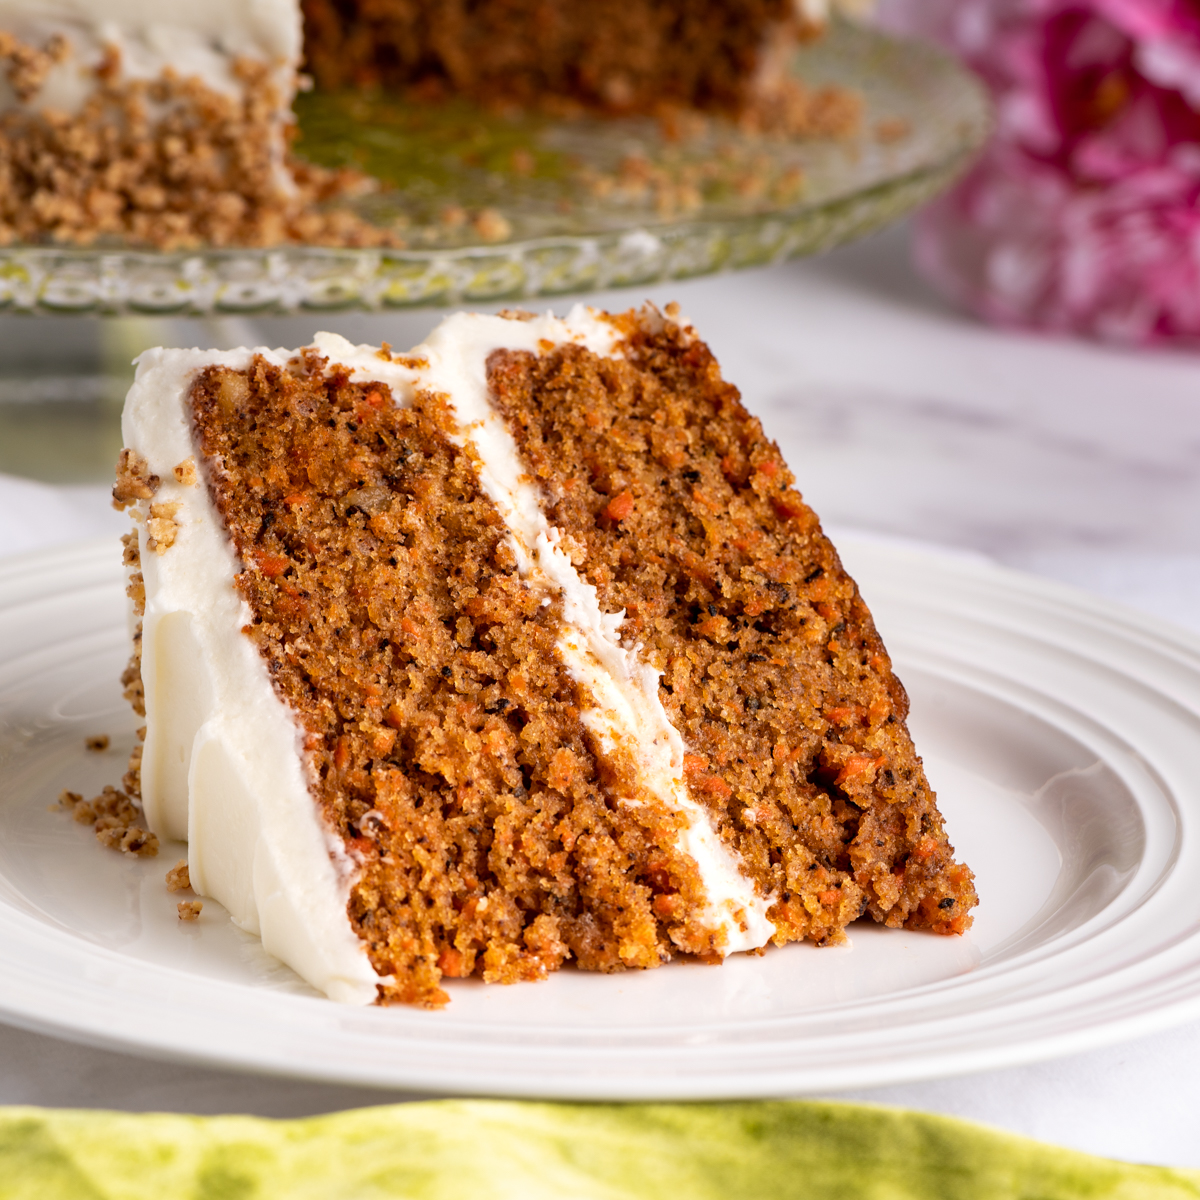 The Best Old Fashioned Carrot Cake Recipe - Idyllic Pursuit